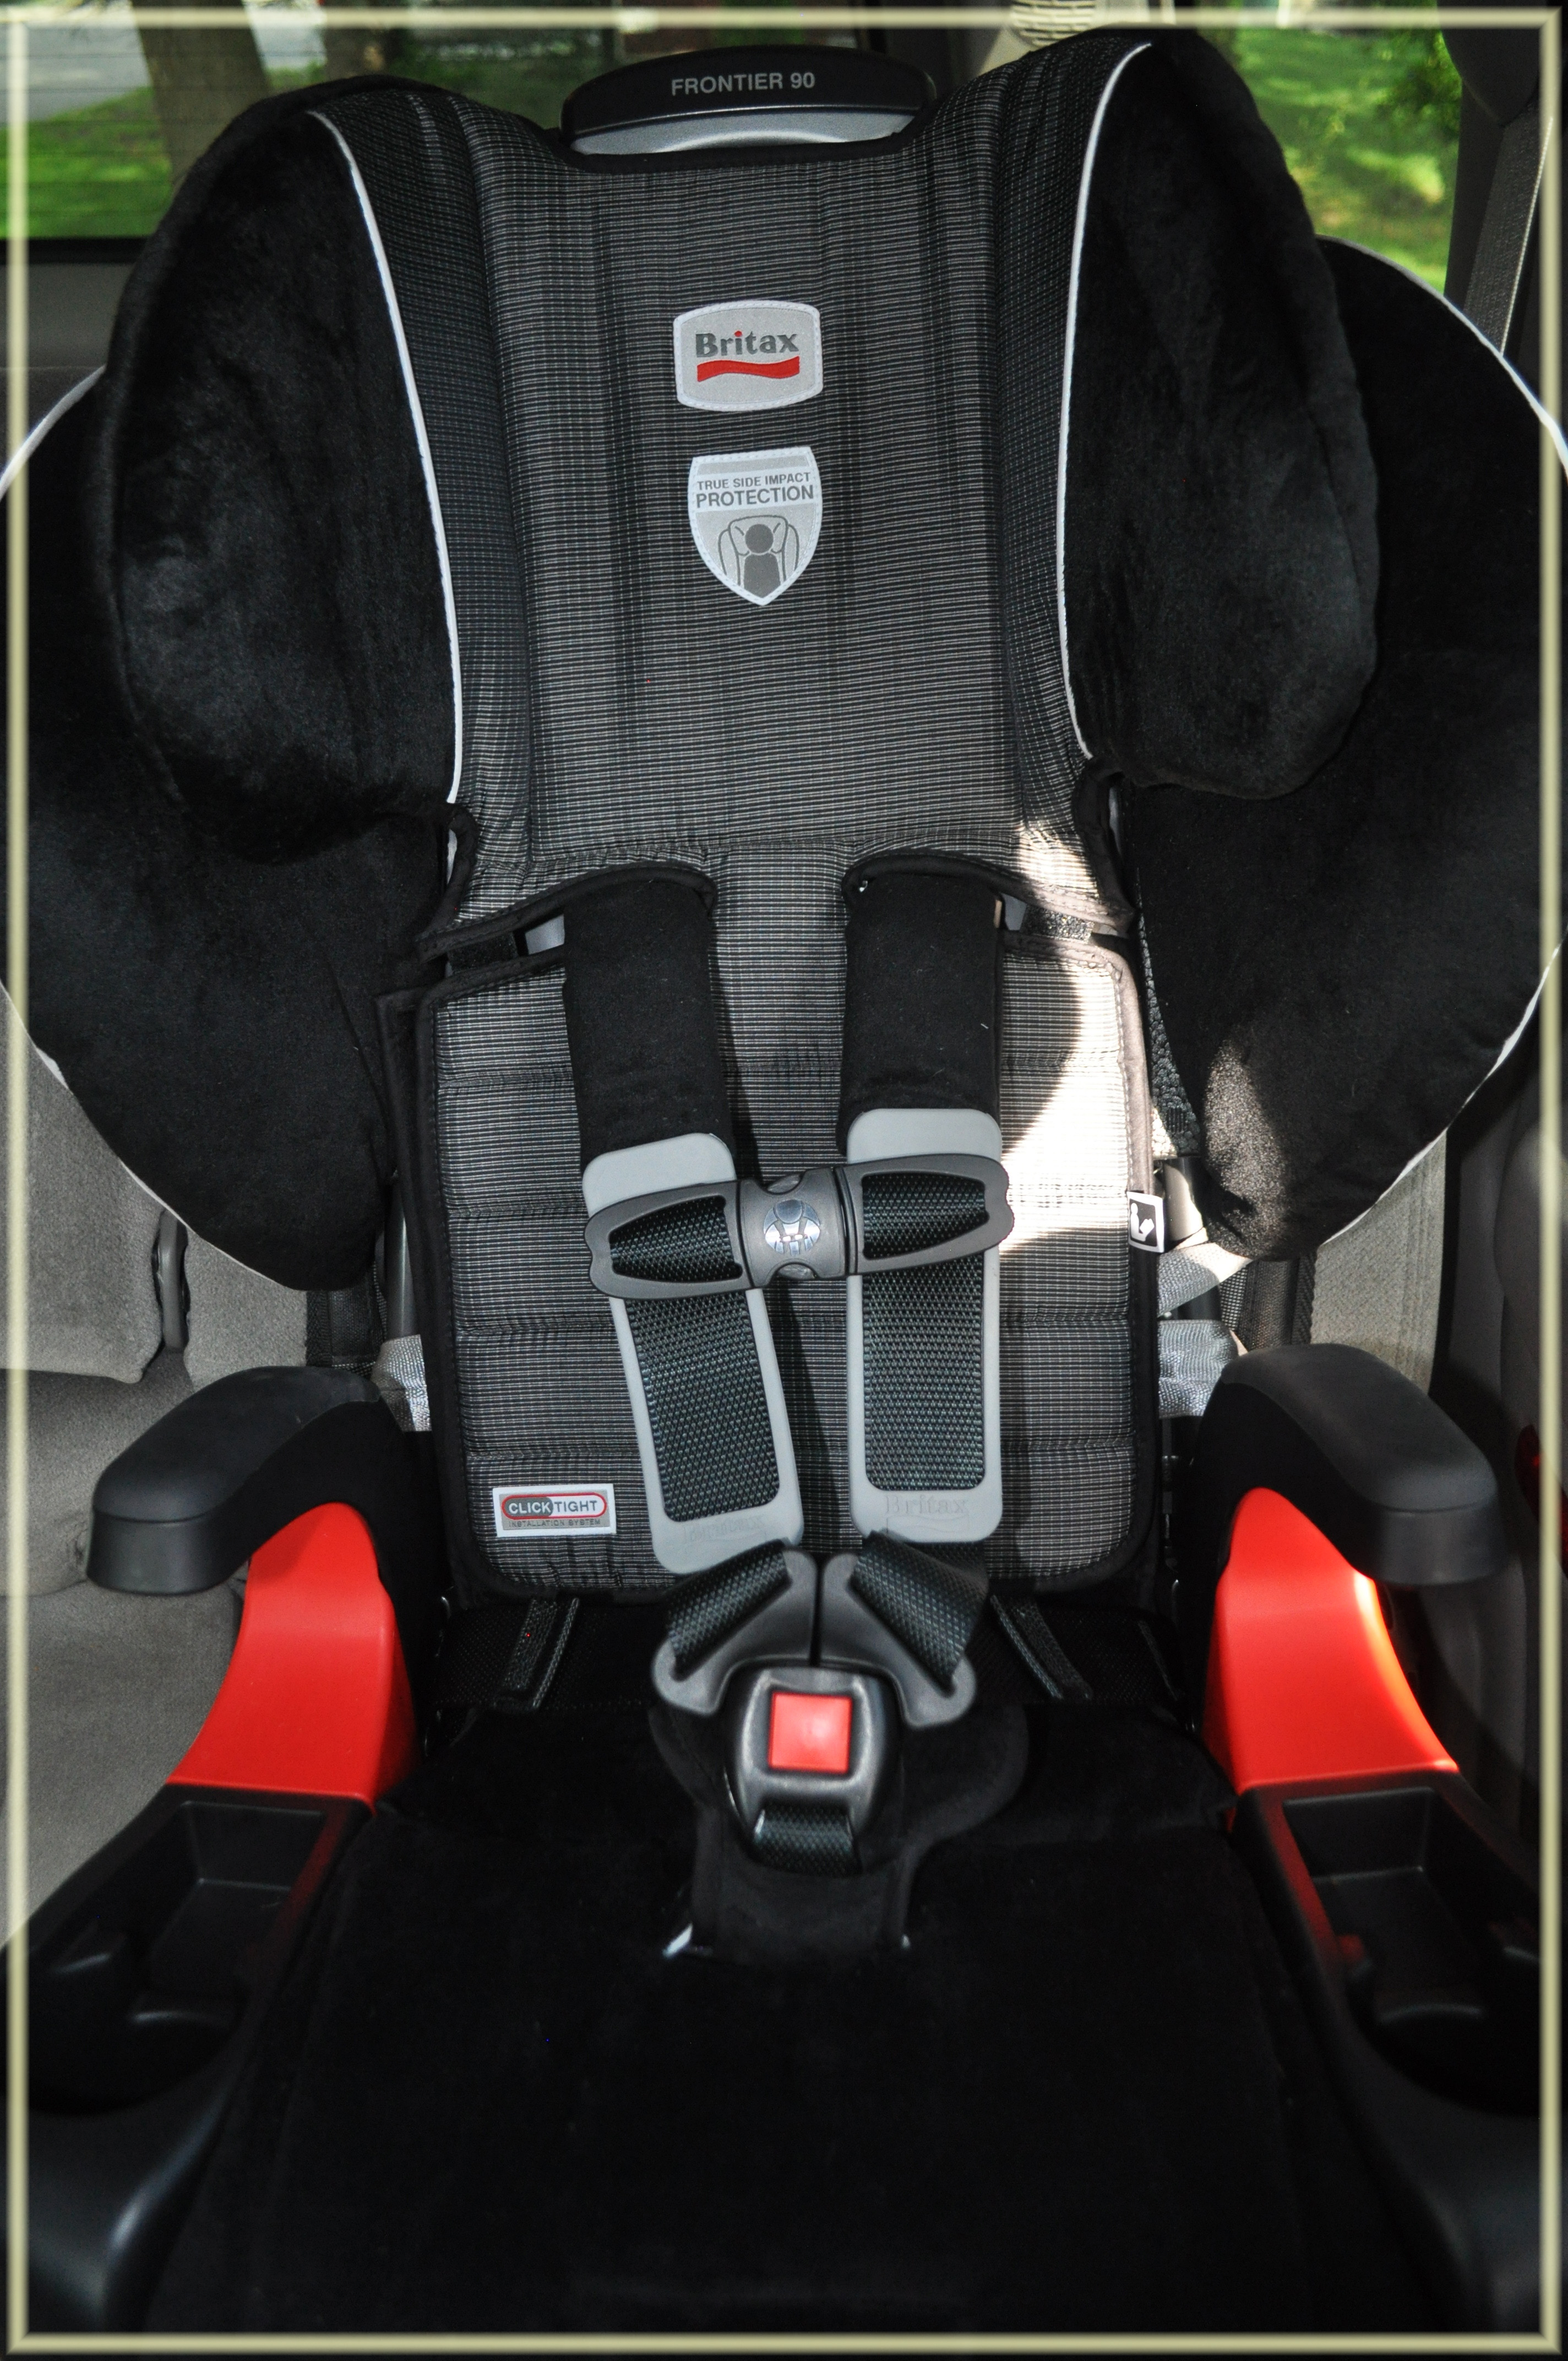 Britax Frontier 90 Review Mommy S, Britax Frontier 90 Car Seat Expiration